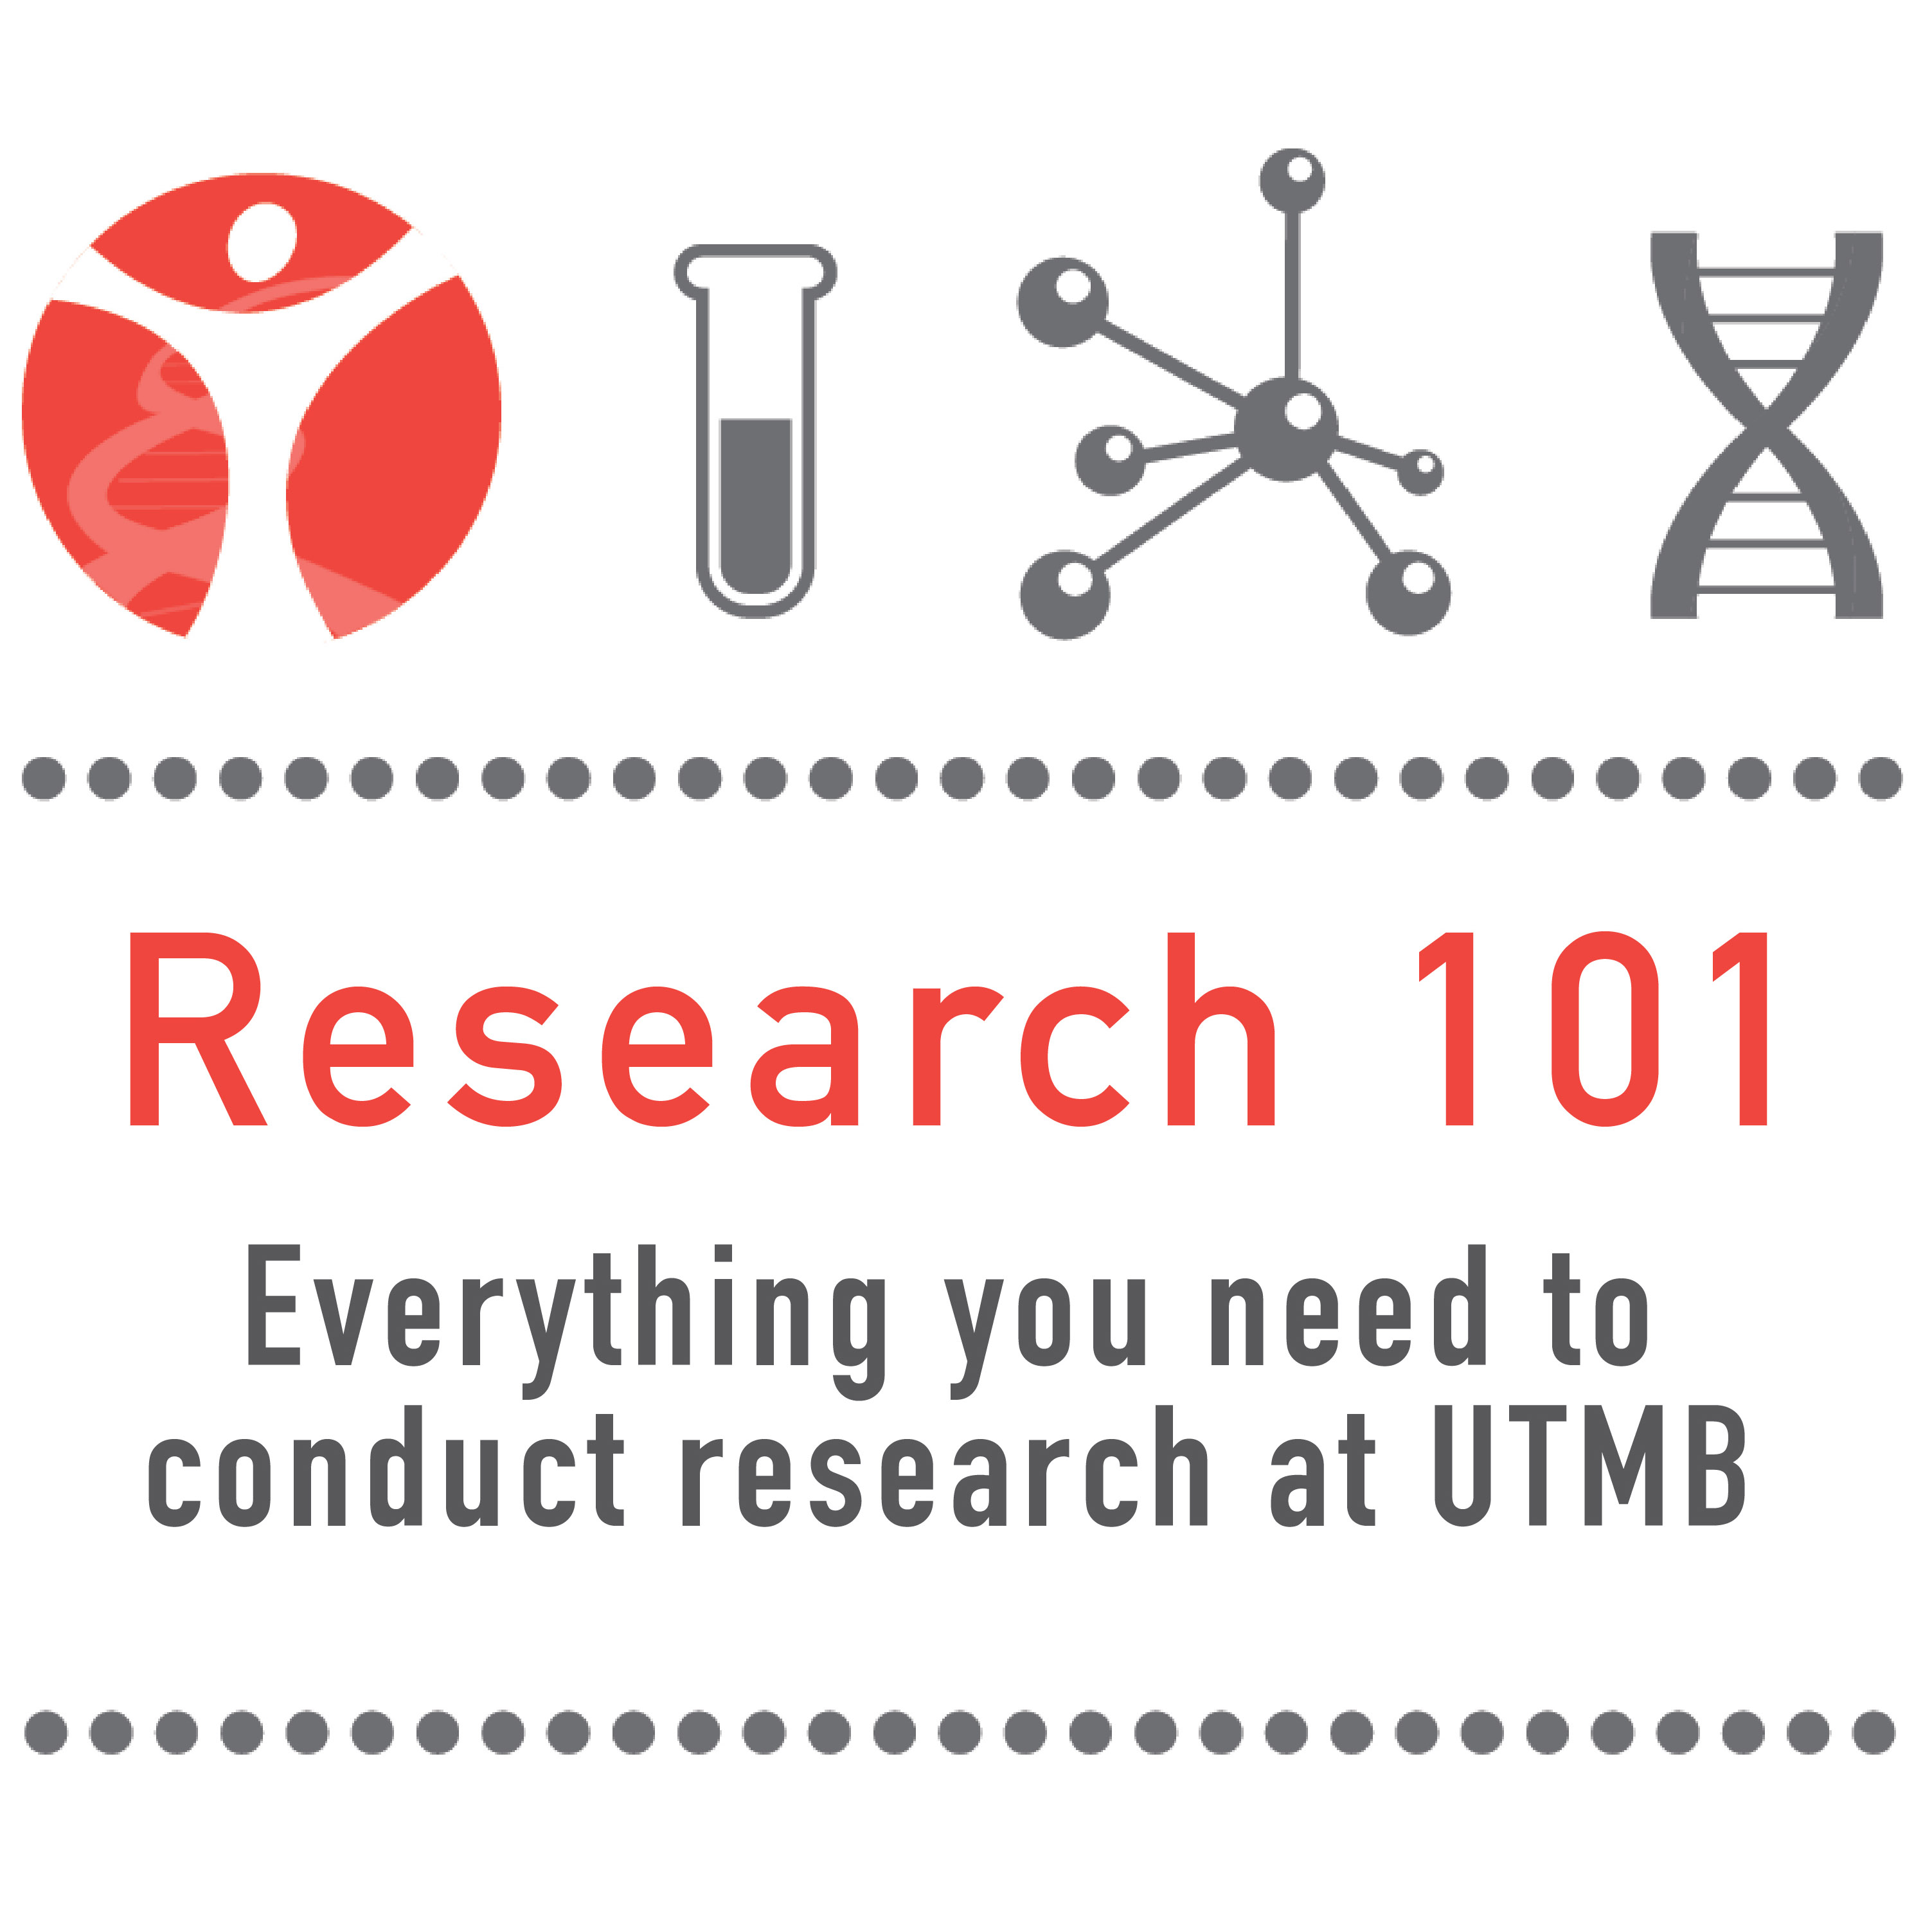 Graphic that says "Research 101, Everything you need to conduct research at UTMB"